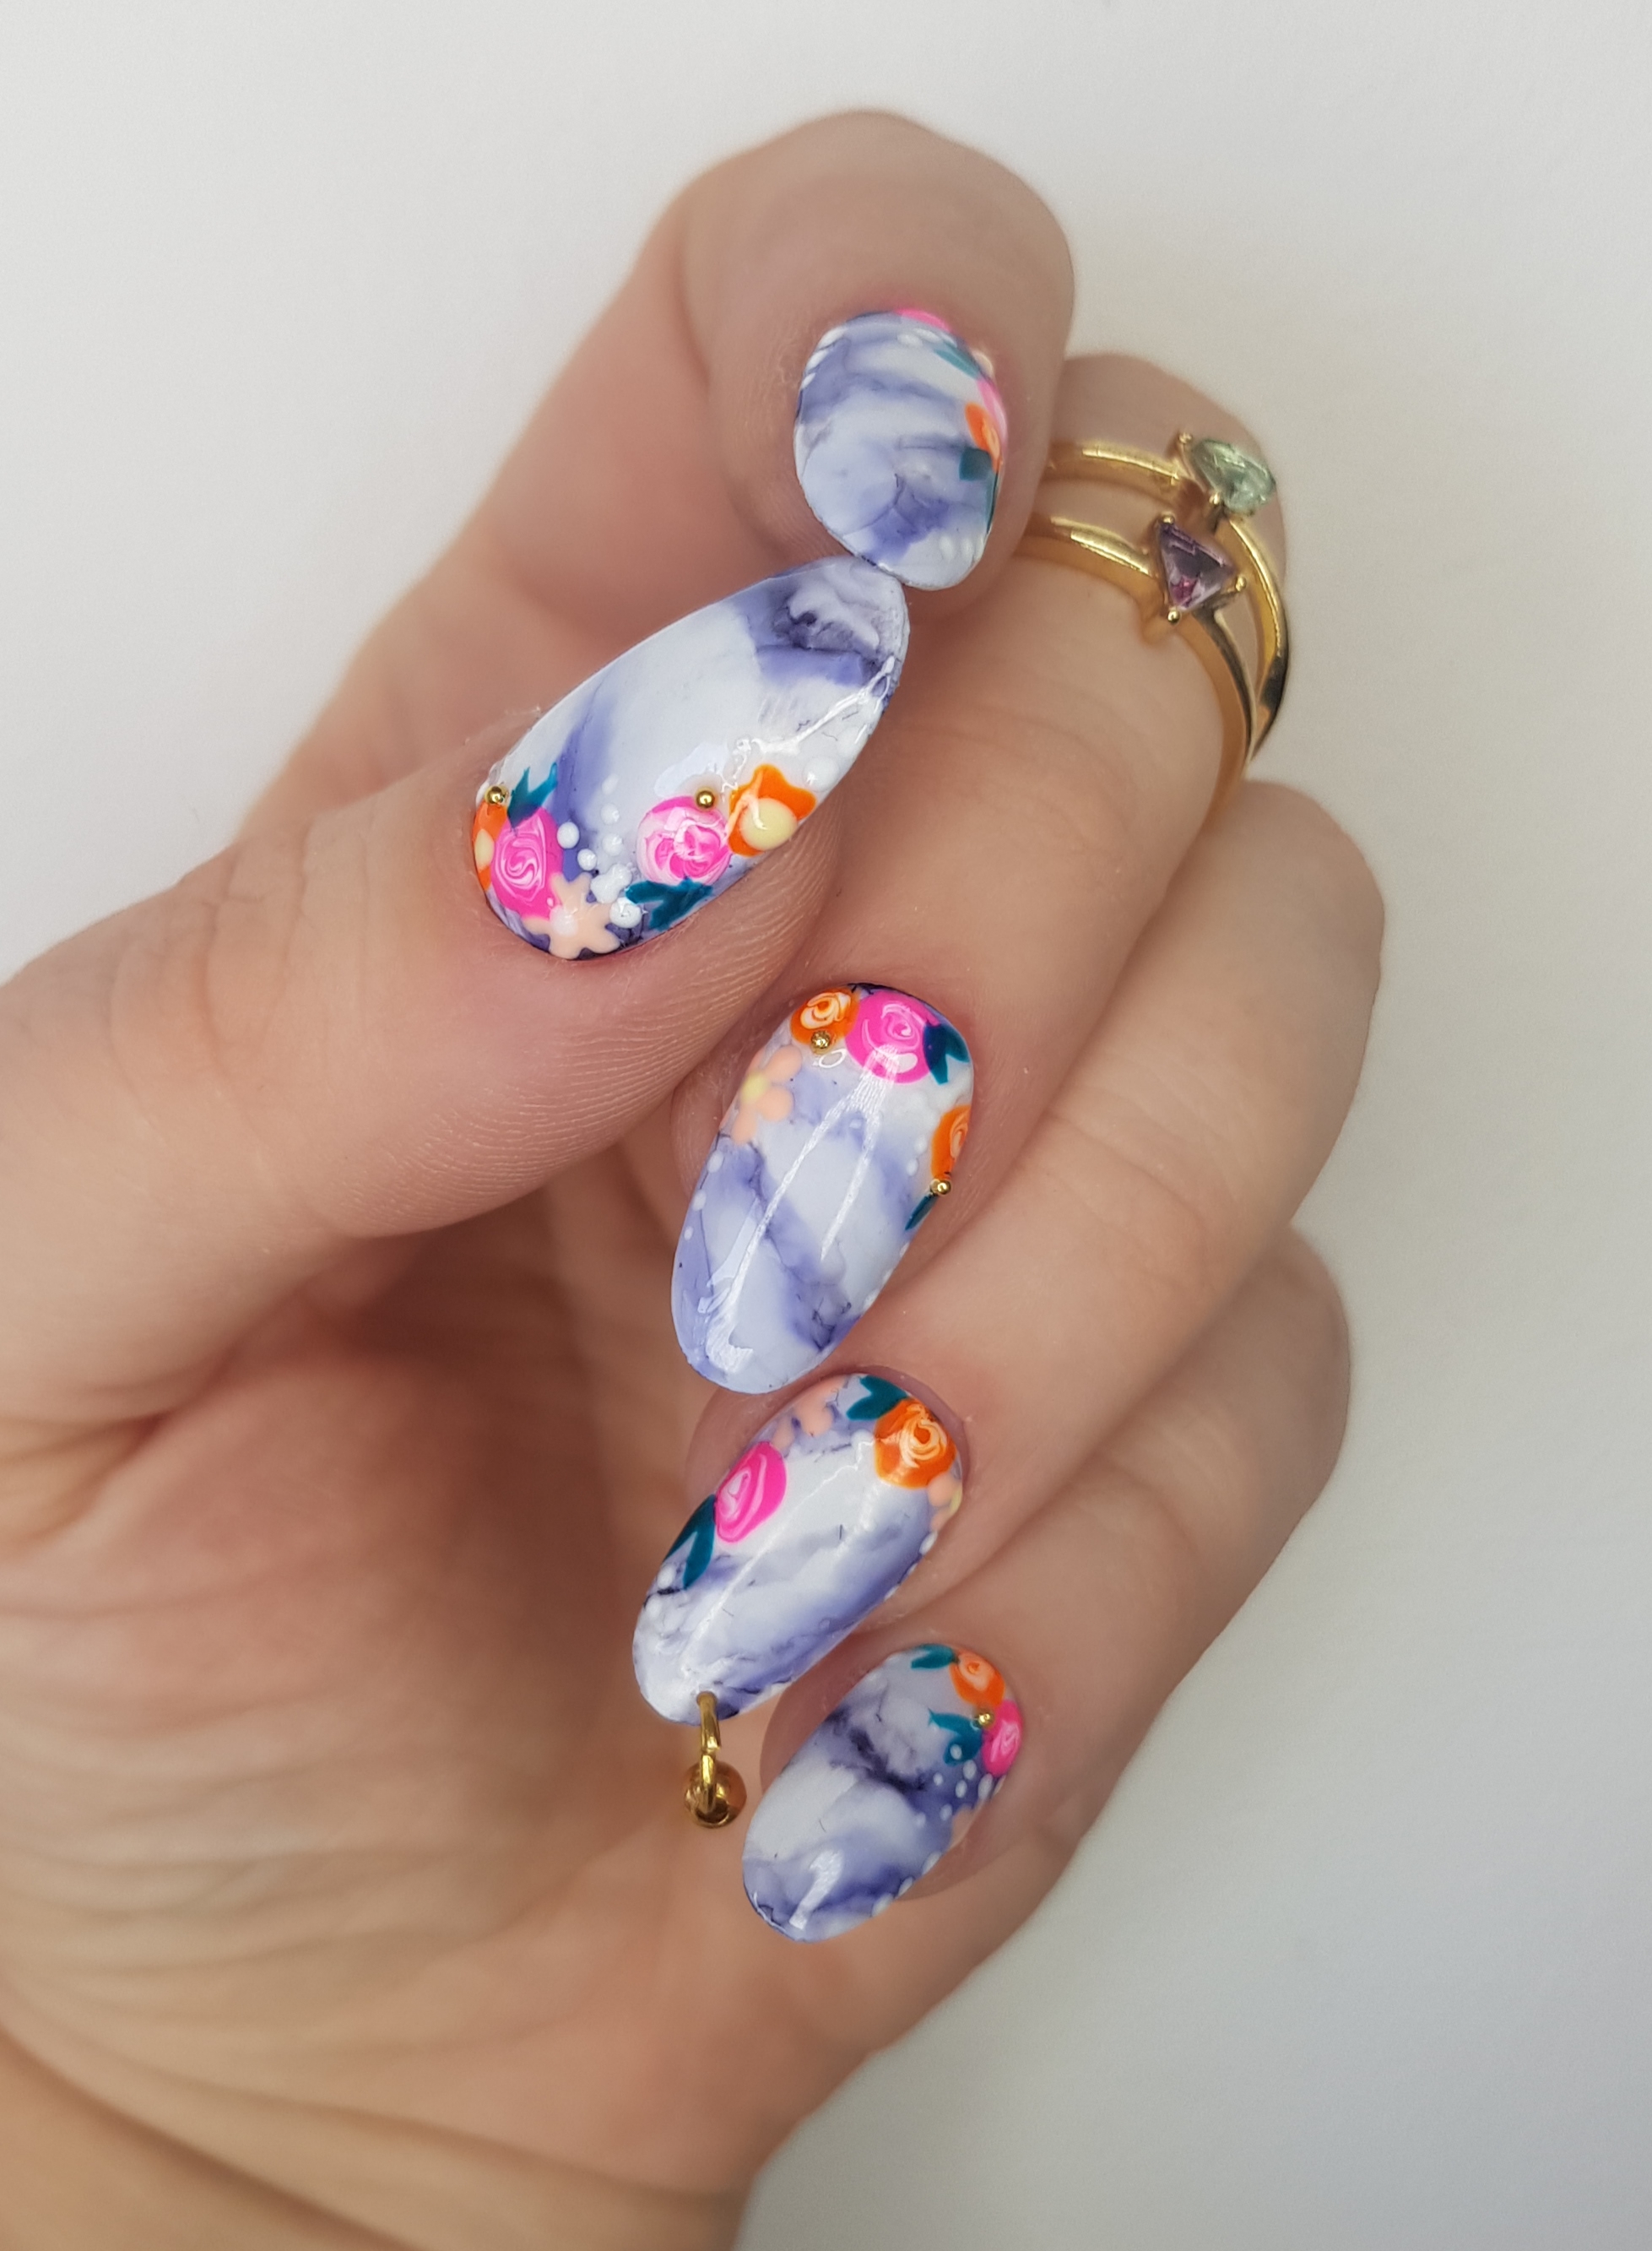 "may Flowers" Spring nails trends and tutorial - DVAMag